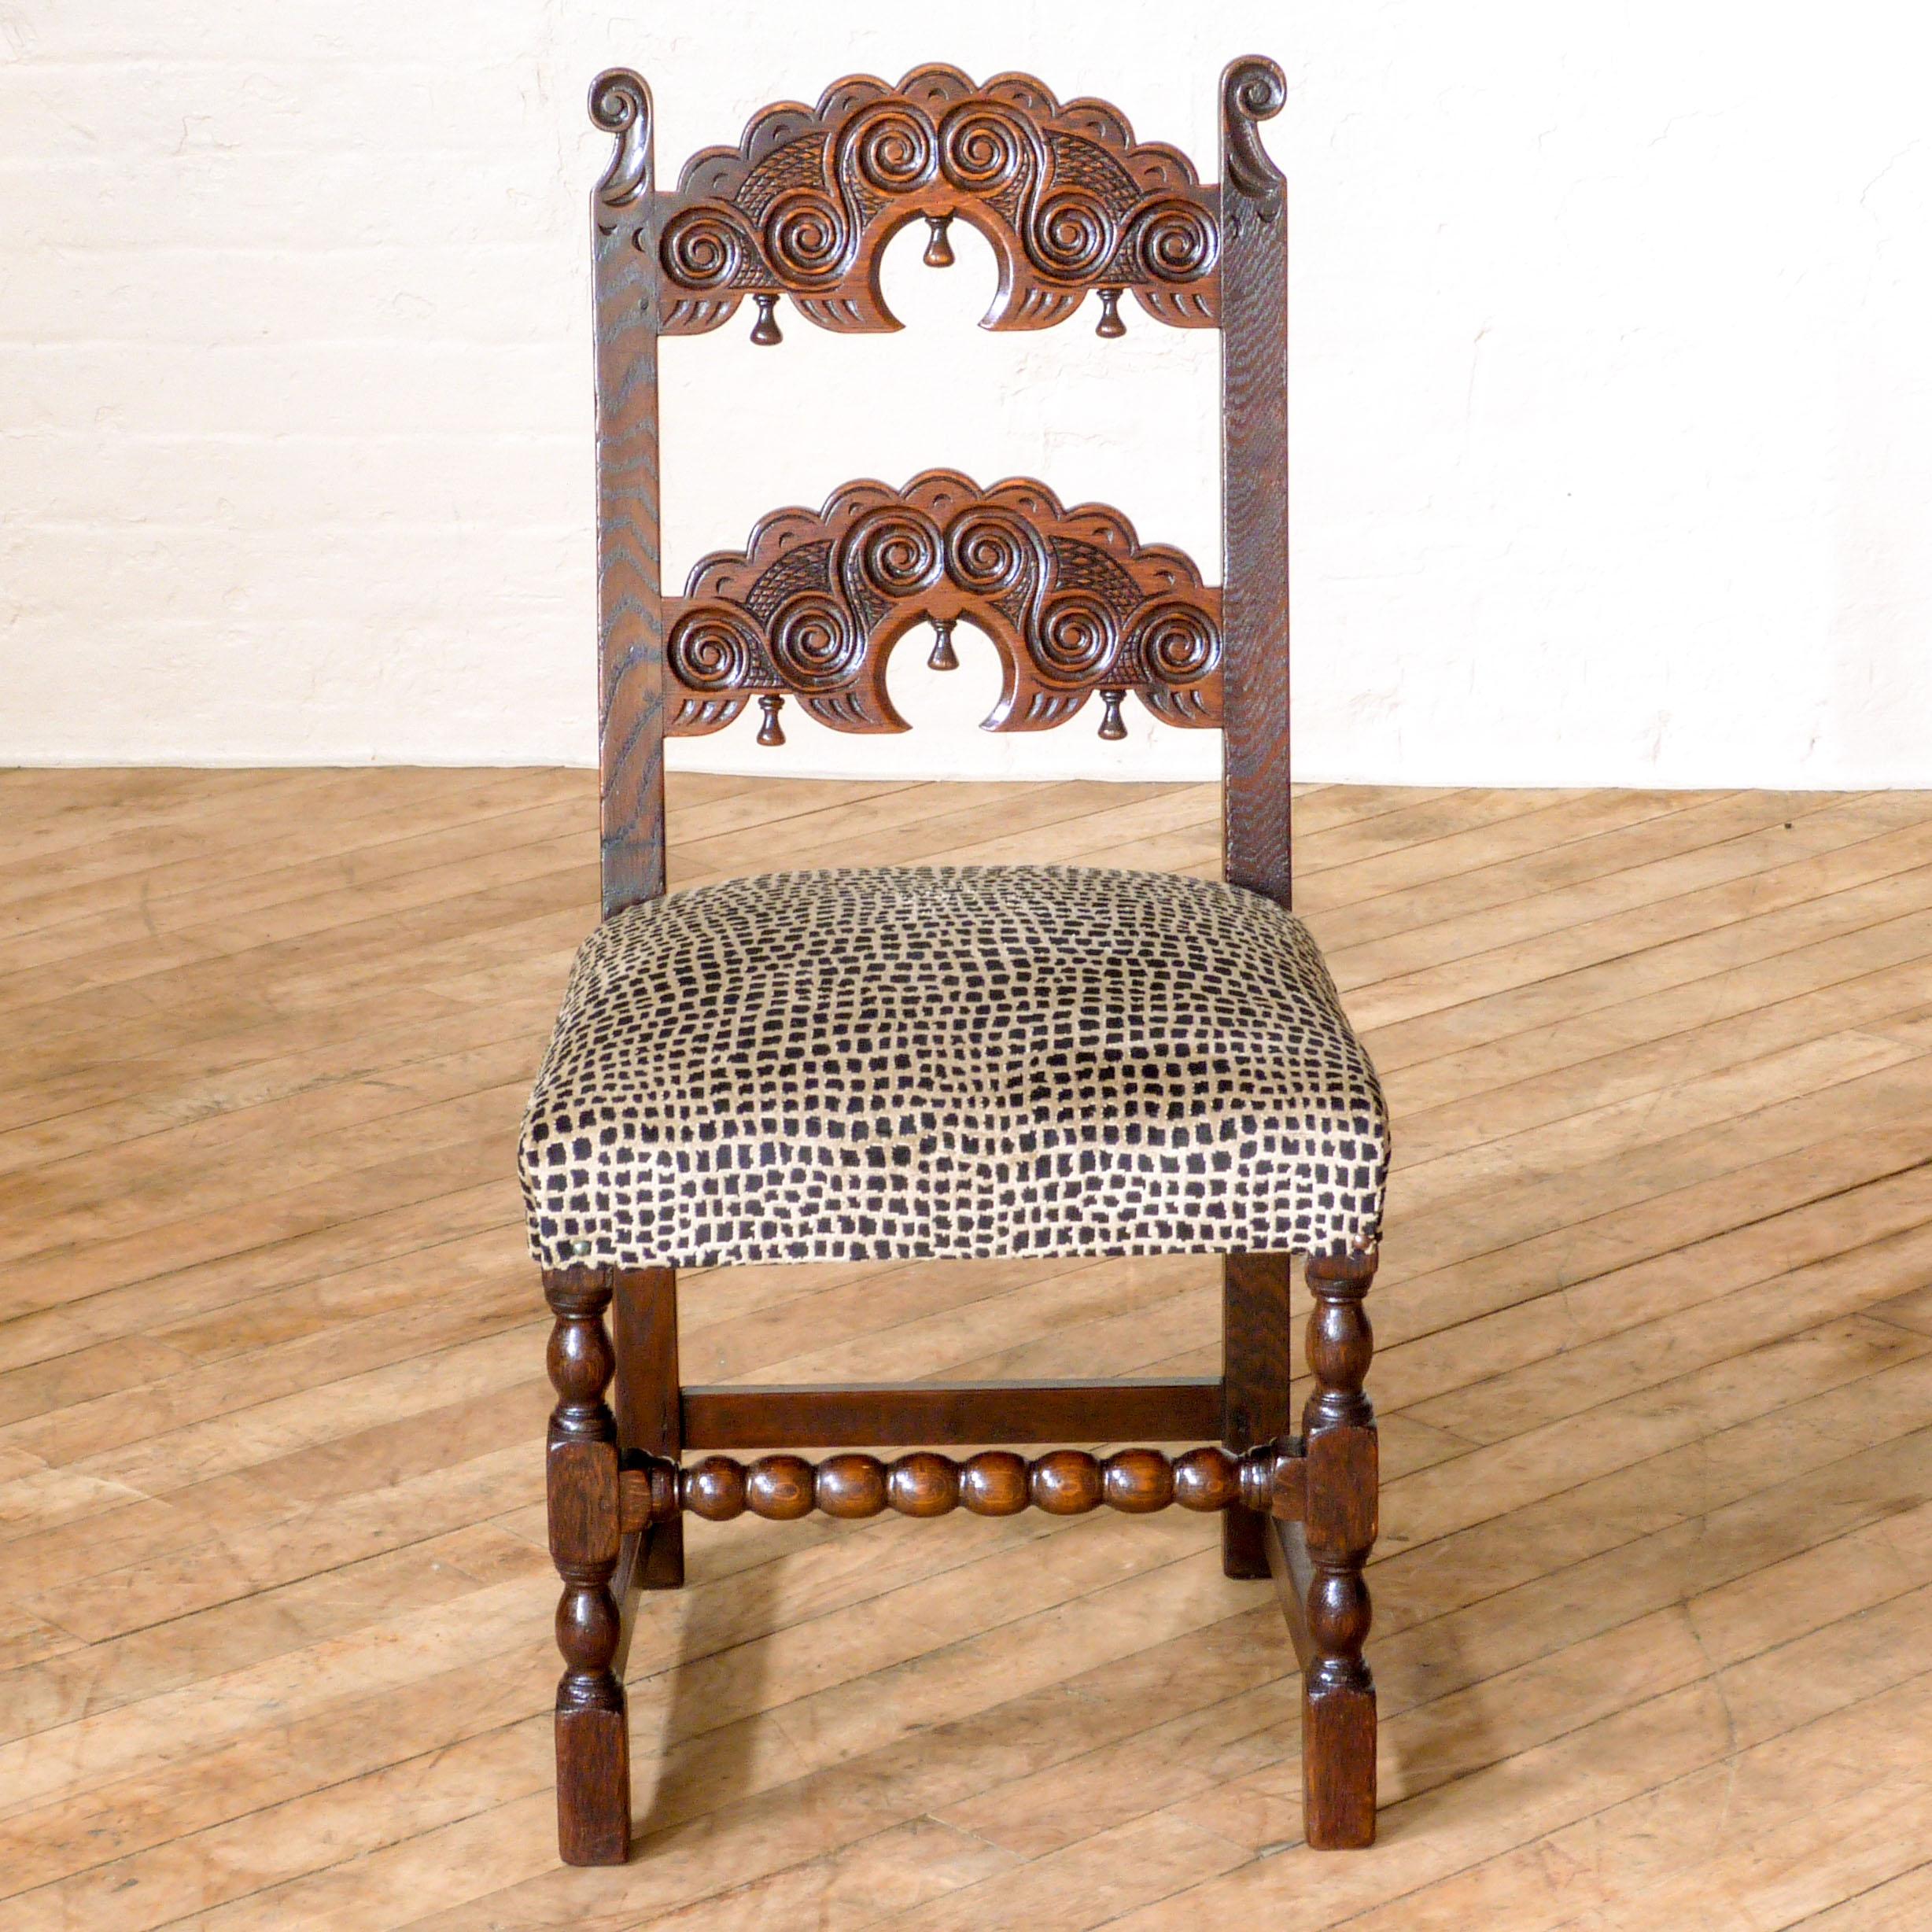 Set of six Derbyshire style oak chairs in the 17th century manner circa 1920 all in very good and sound condition. All the chairs have been reupholstered in a velvet animal print. A very unique set.
   